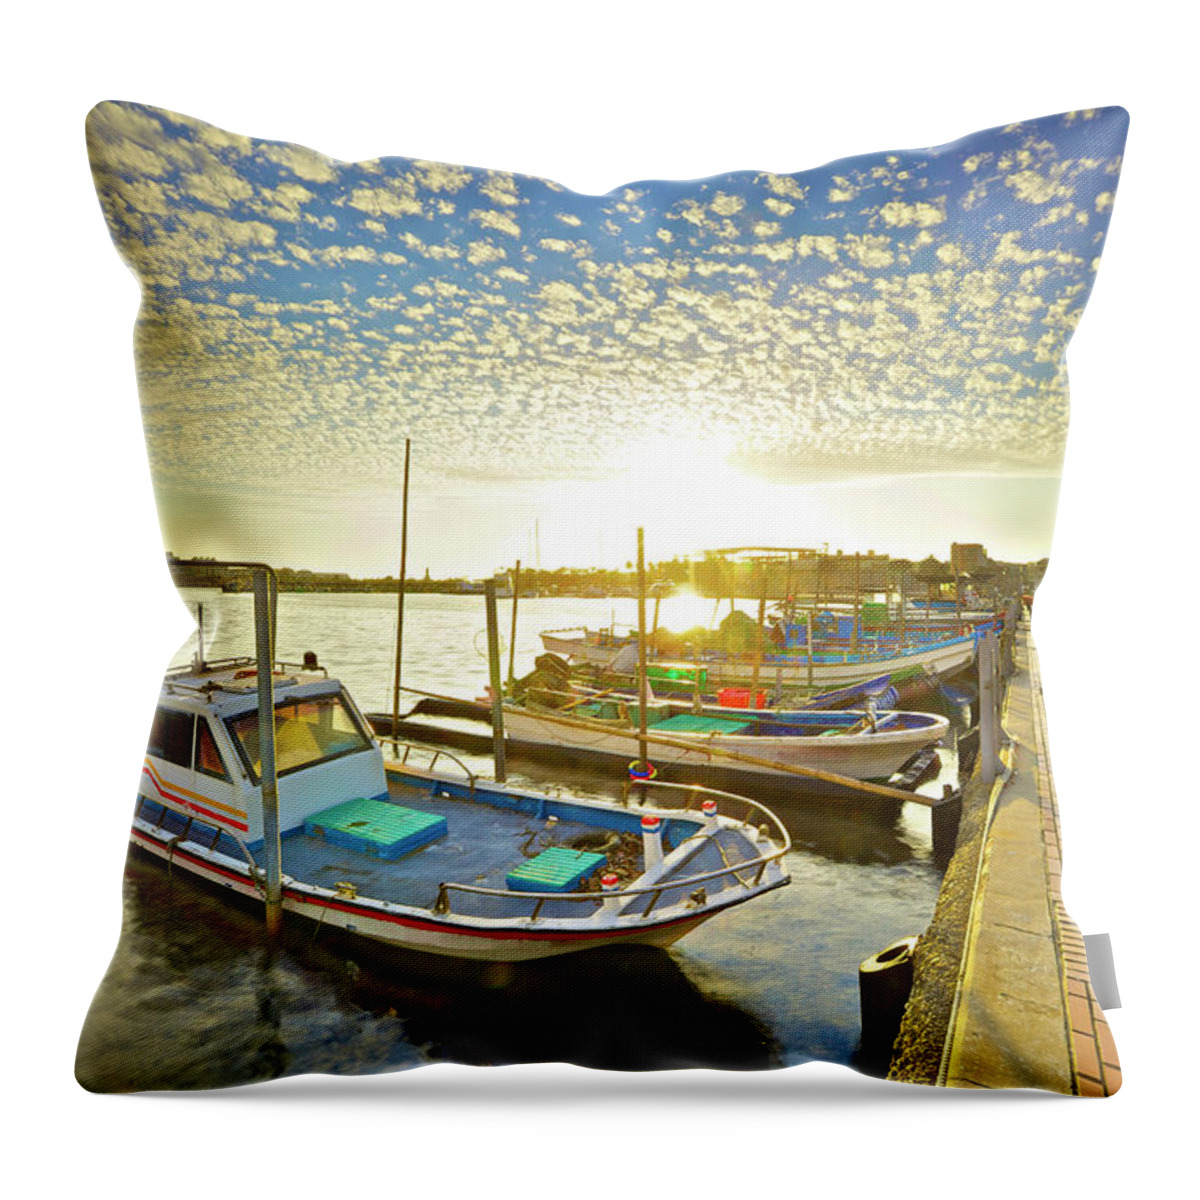 Scenics Throw Pillow featuring the photograph Warm Anping by Sunrise@dawn Photography